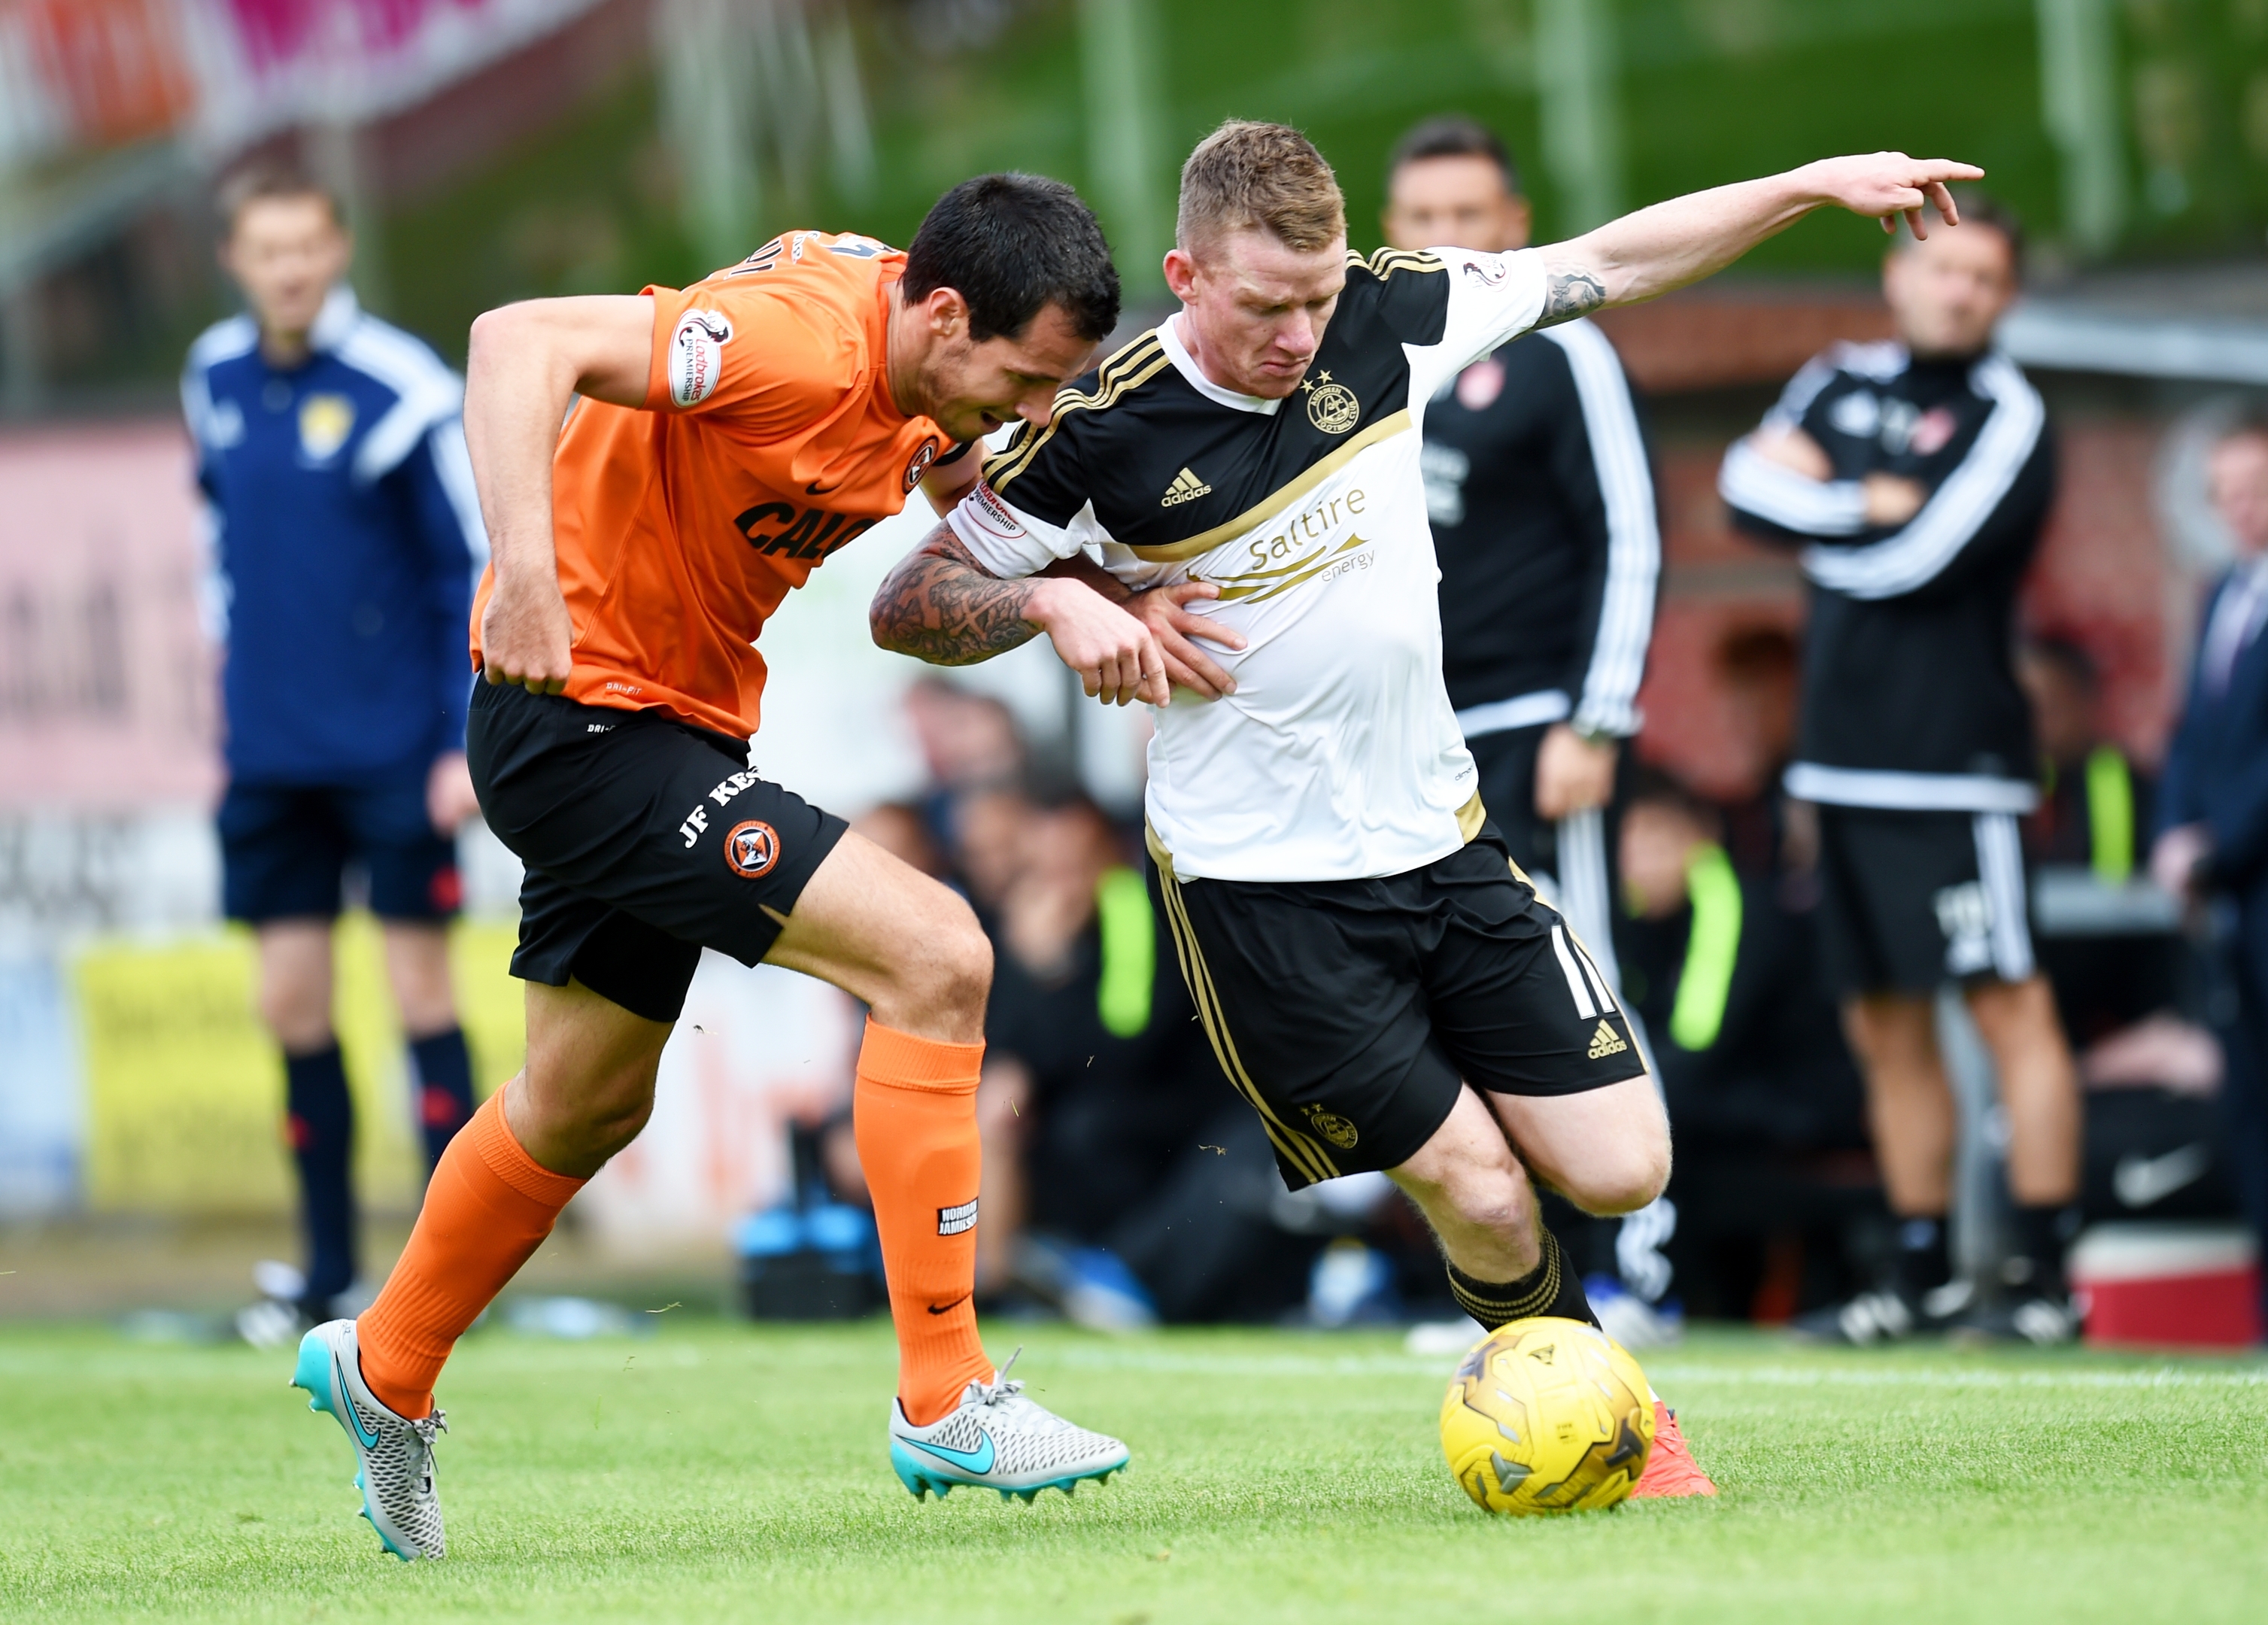 The battle between  Ryan McGowan and  Johnny Hayes was one of the highlights of the game